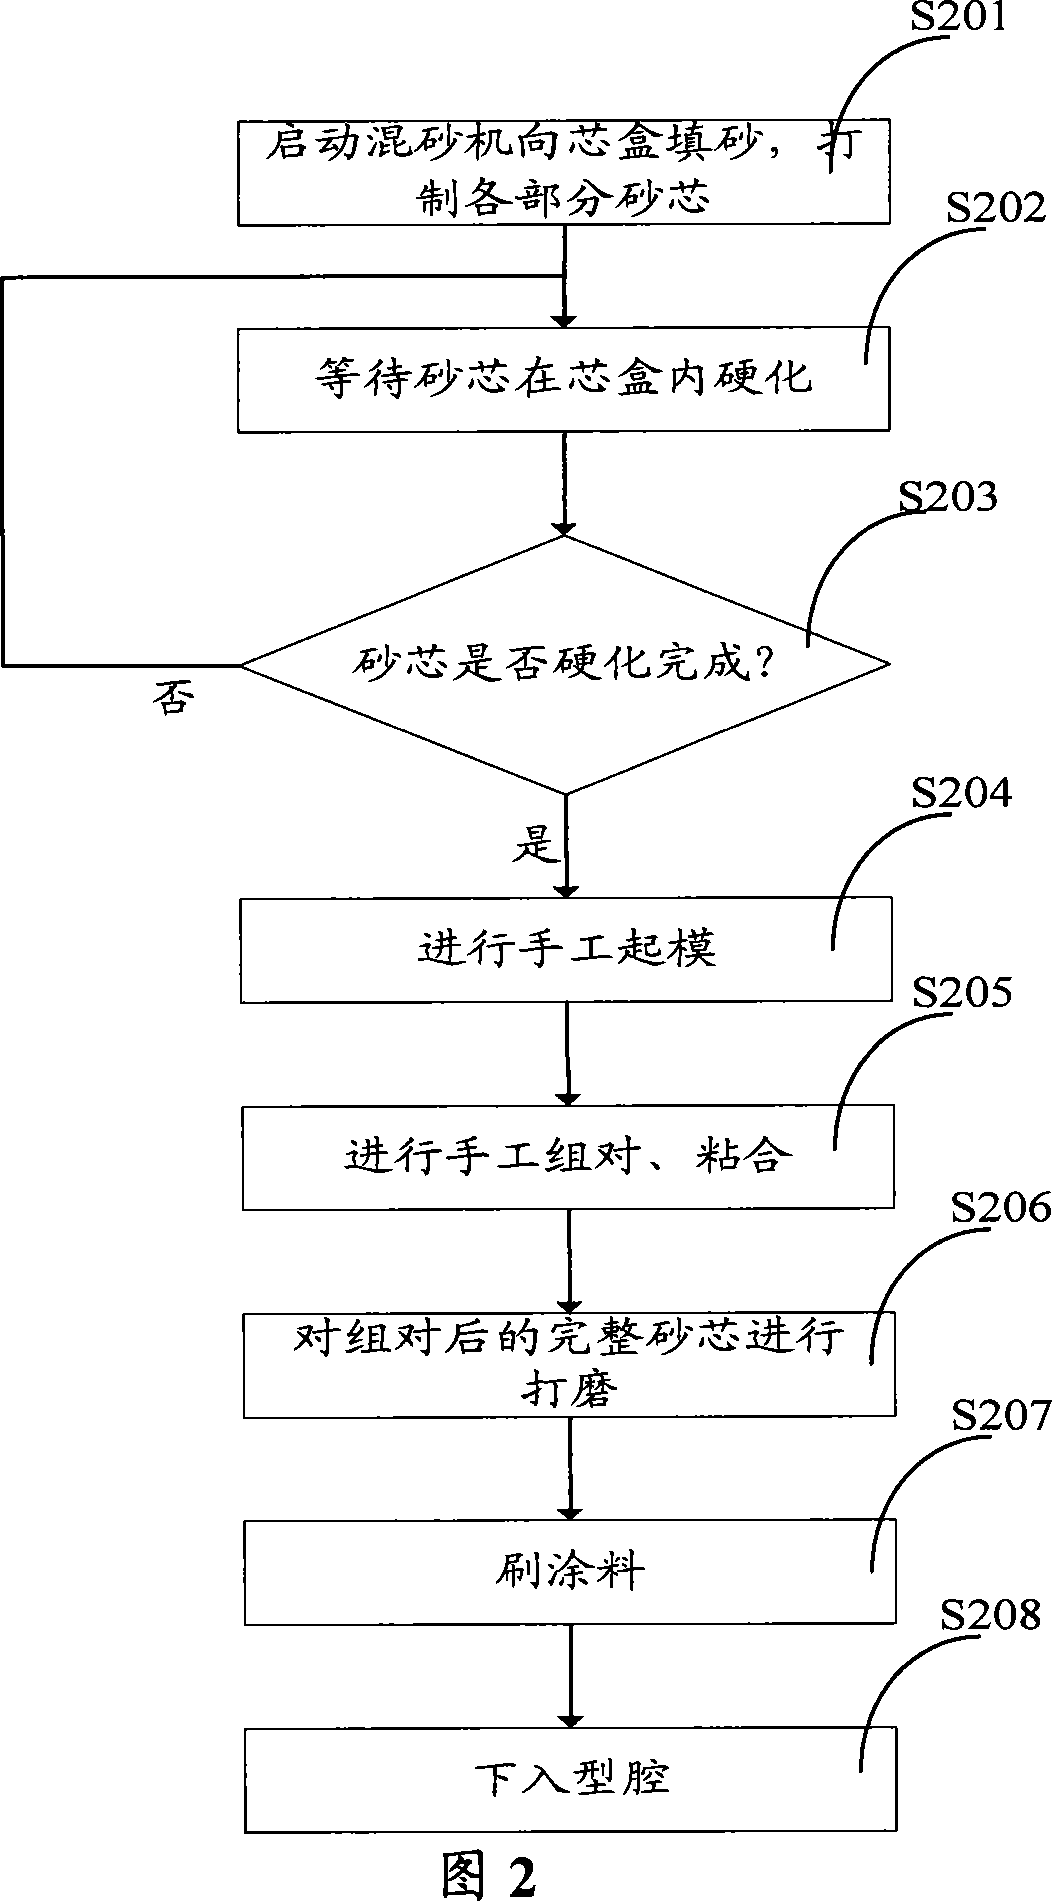 Bolster and side frame integral core producing method